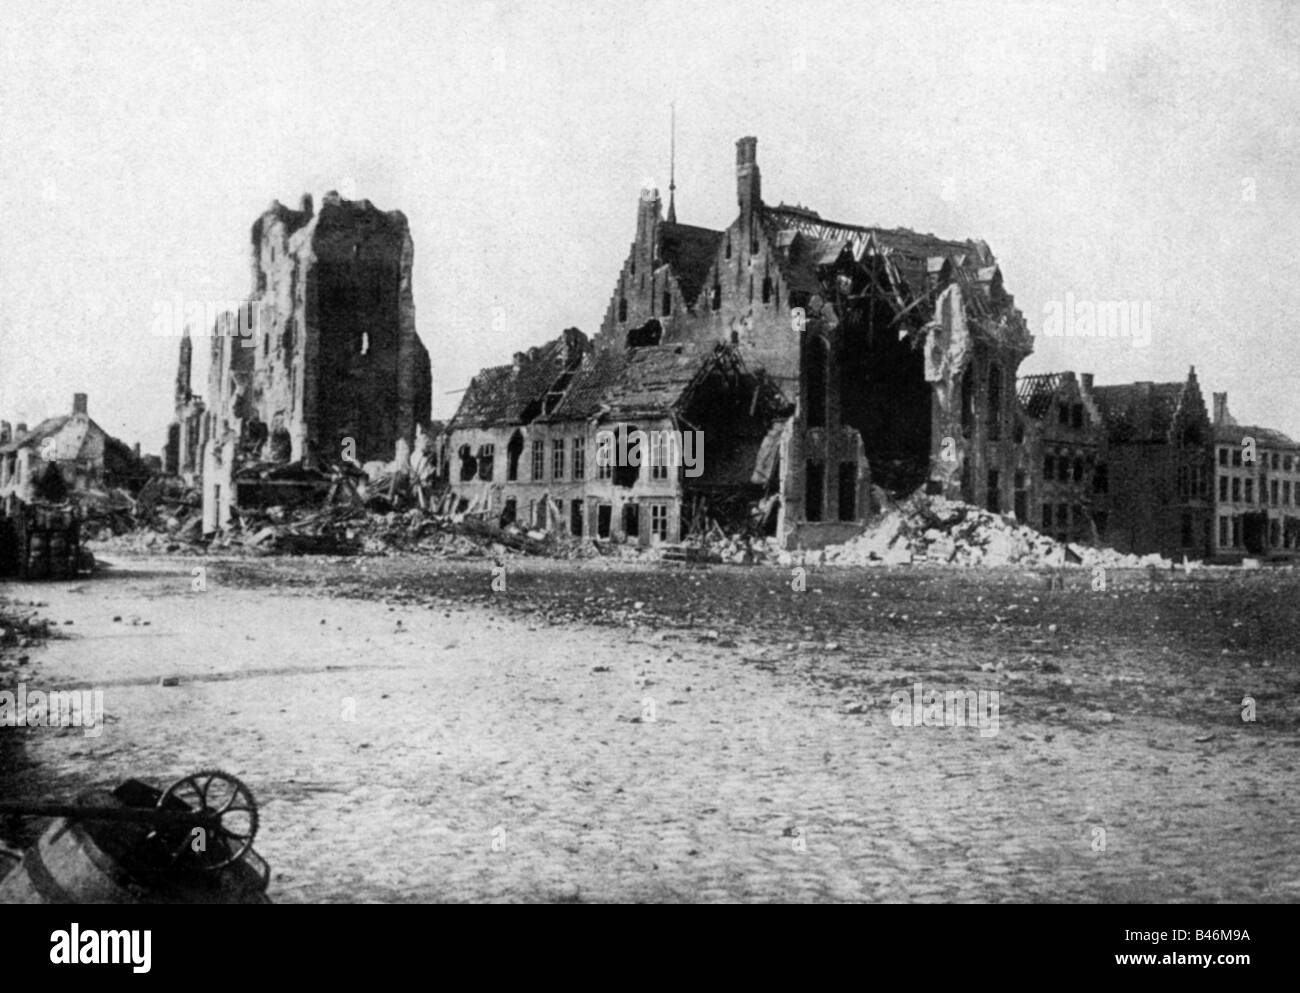 events, First World War / WWI, Western Front, destroyed market place, Diksmuide, Belgium, autumn 1914, Stock Photo